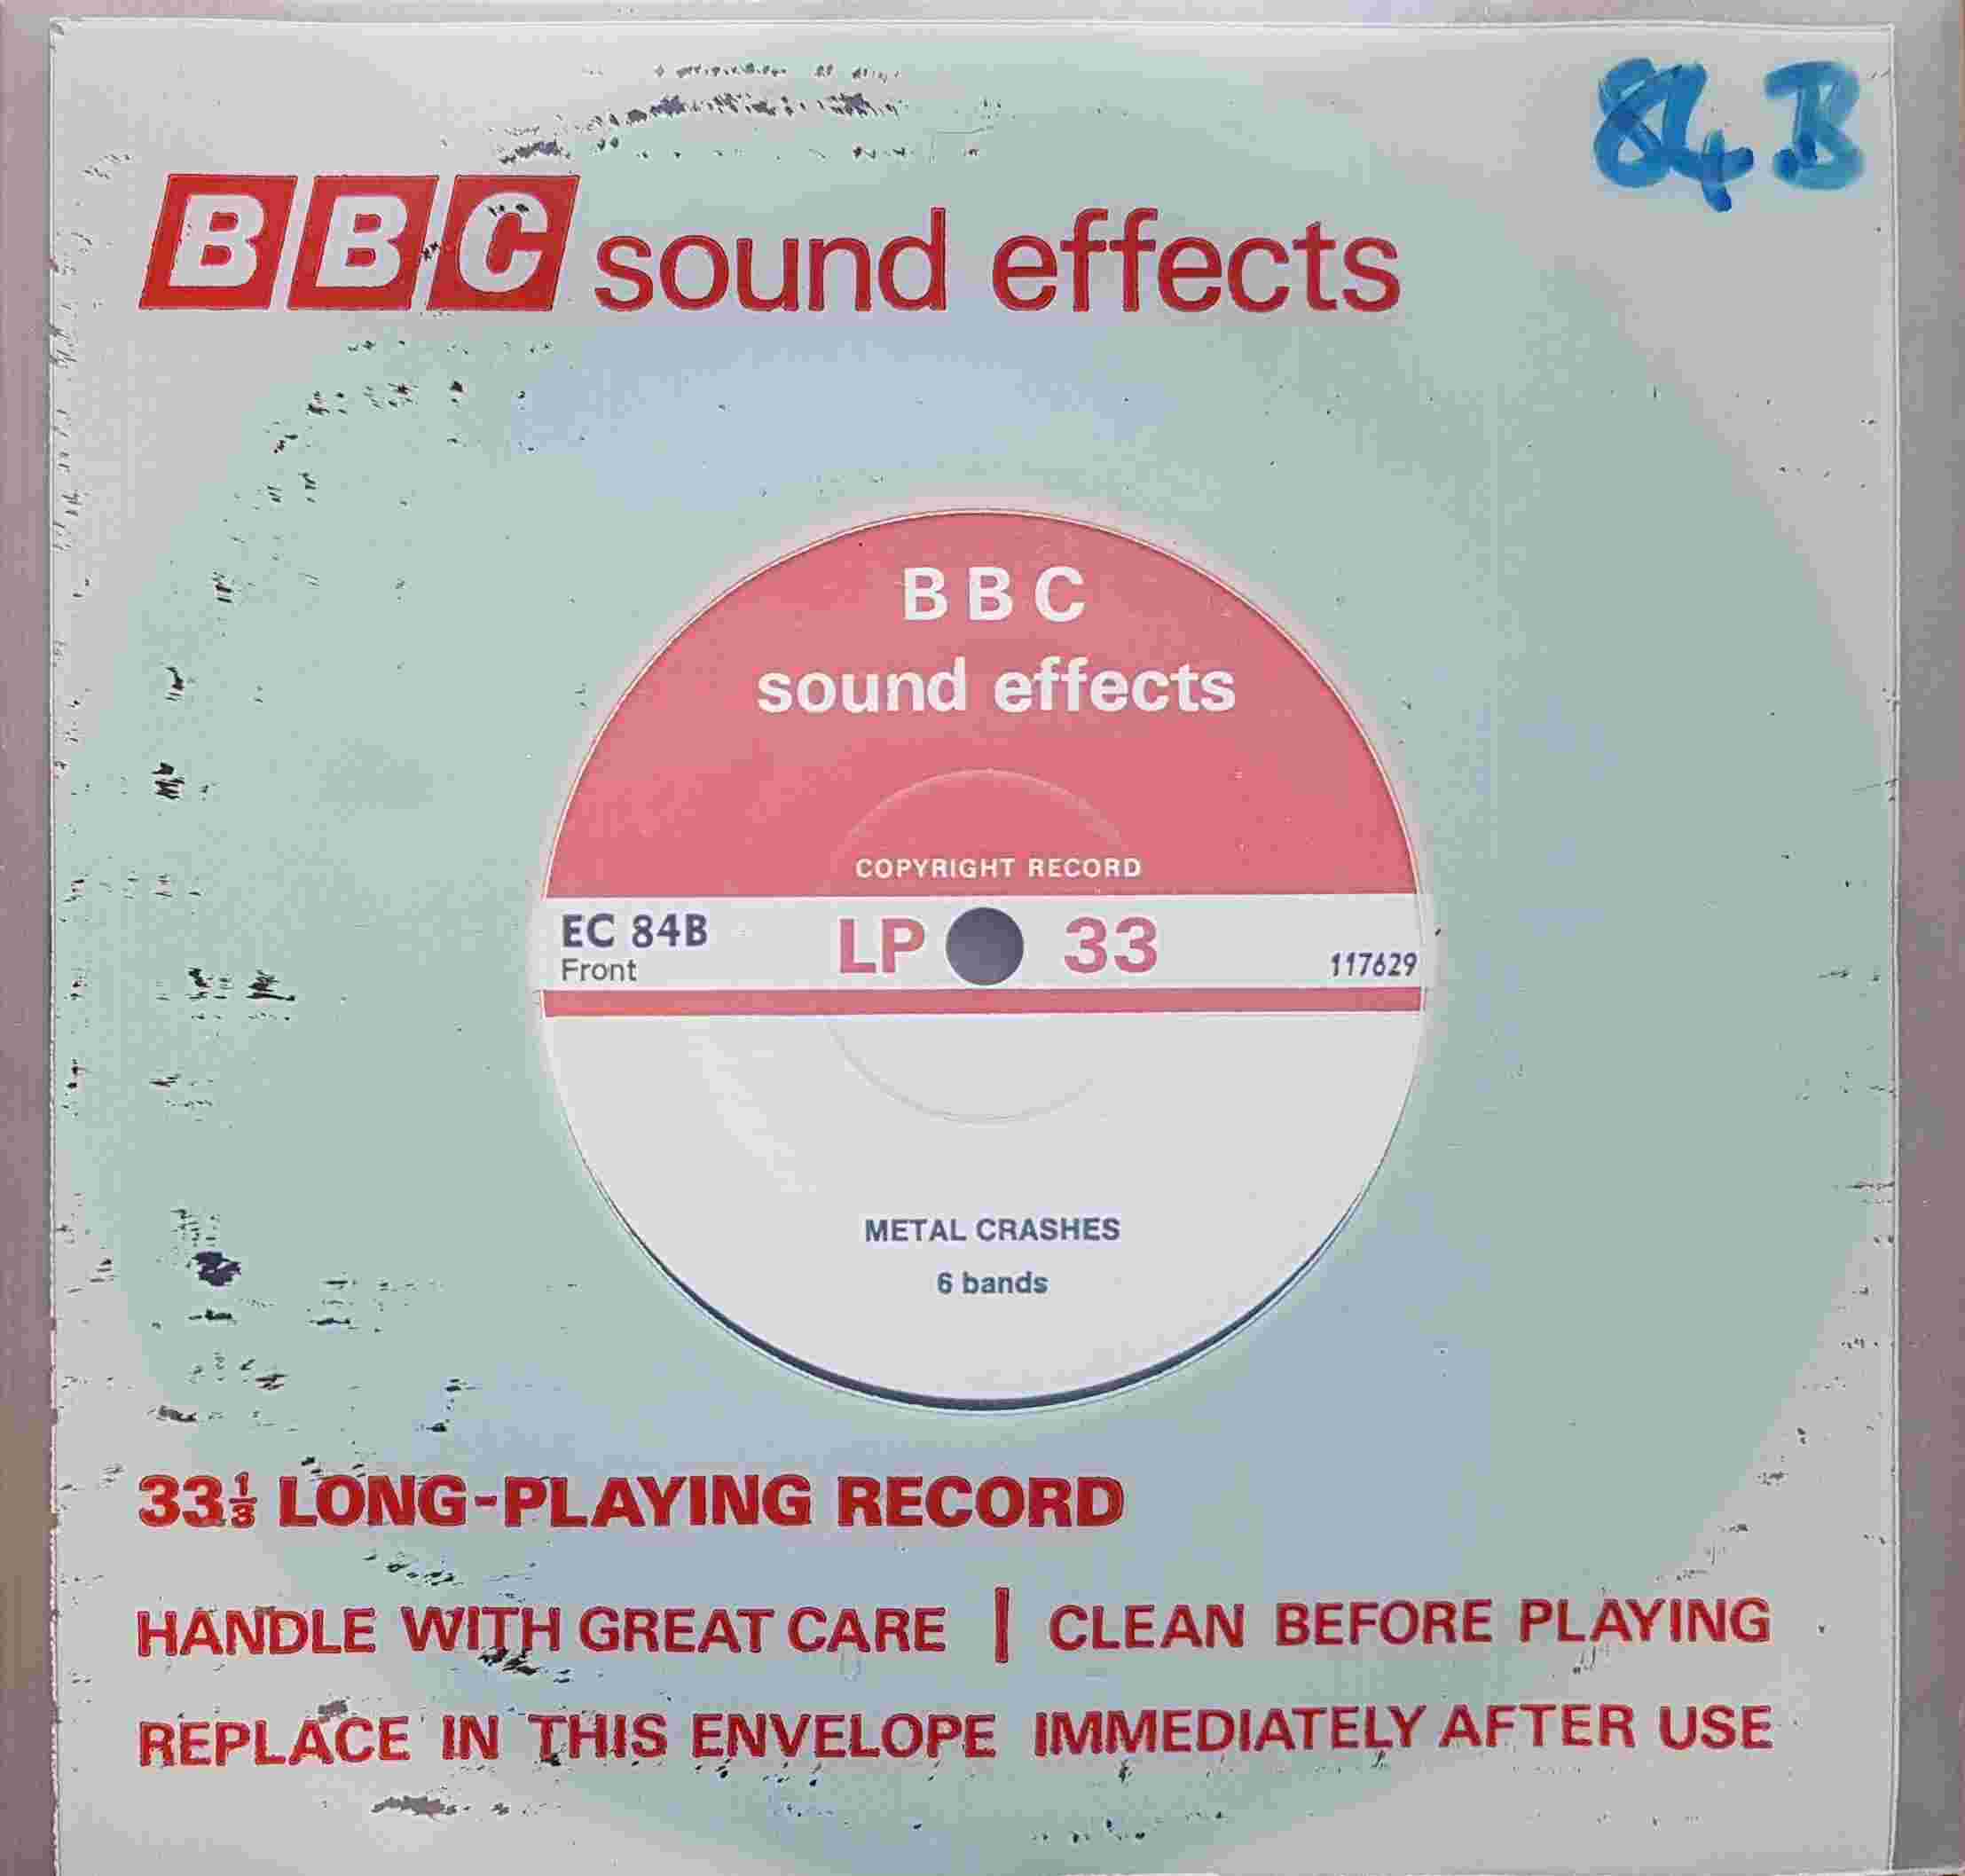 Picture of EC 84B Metal crashes by artist Not registered from the BBC records and Tapes library